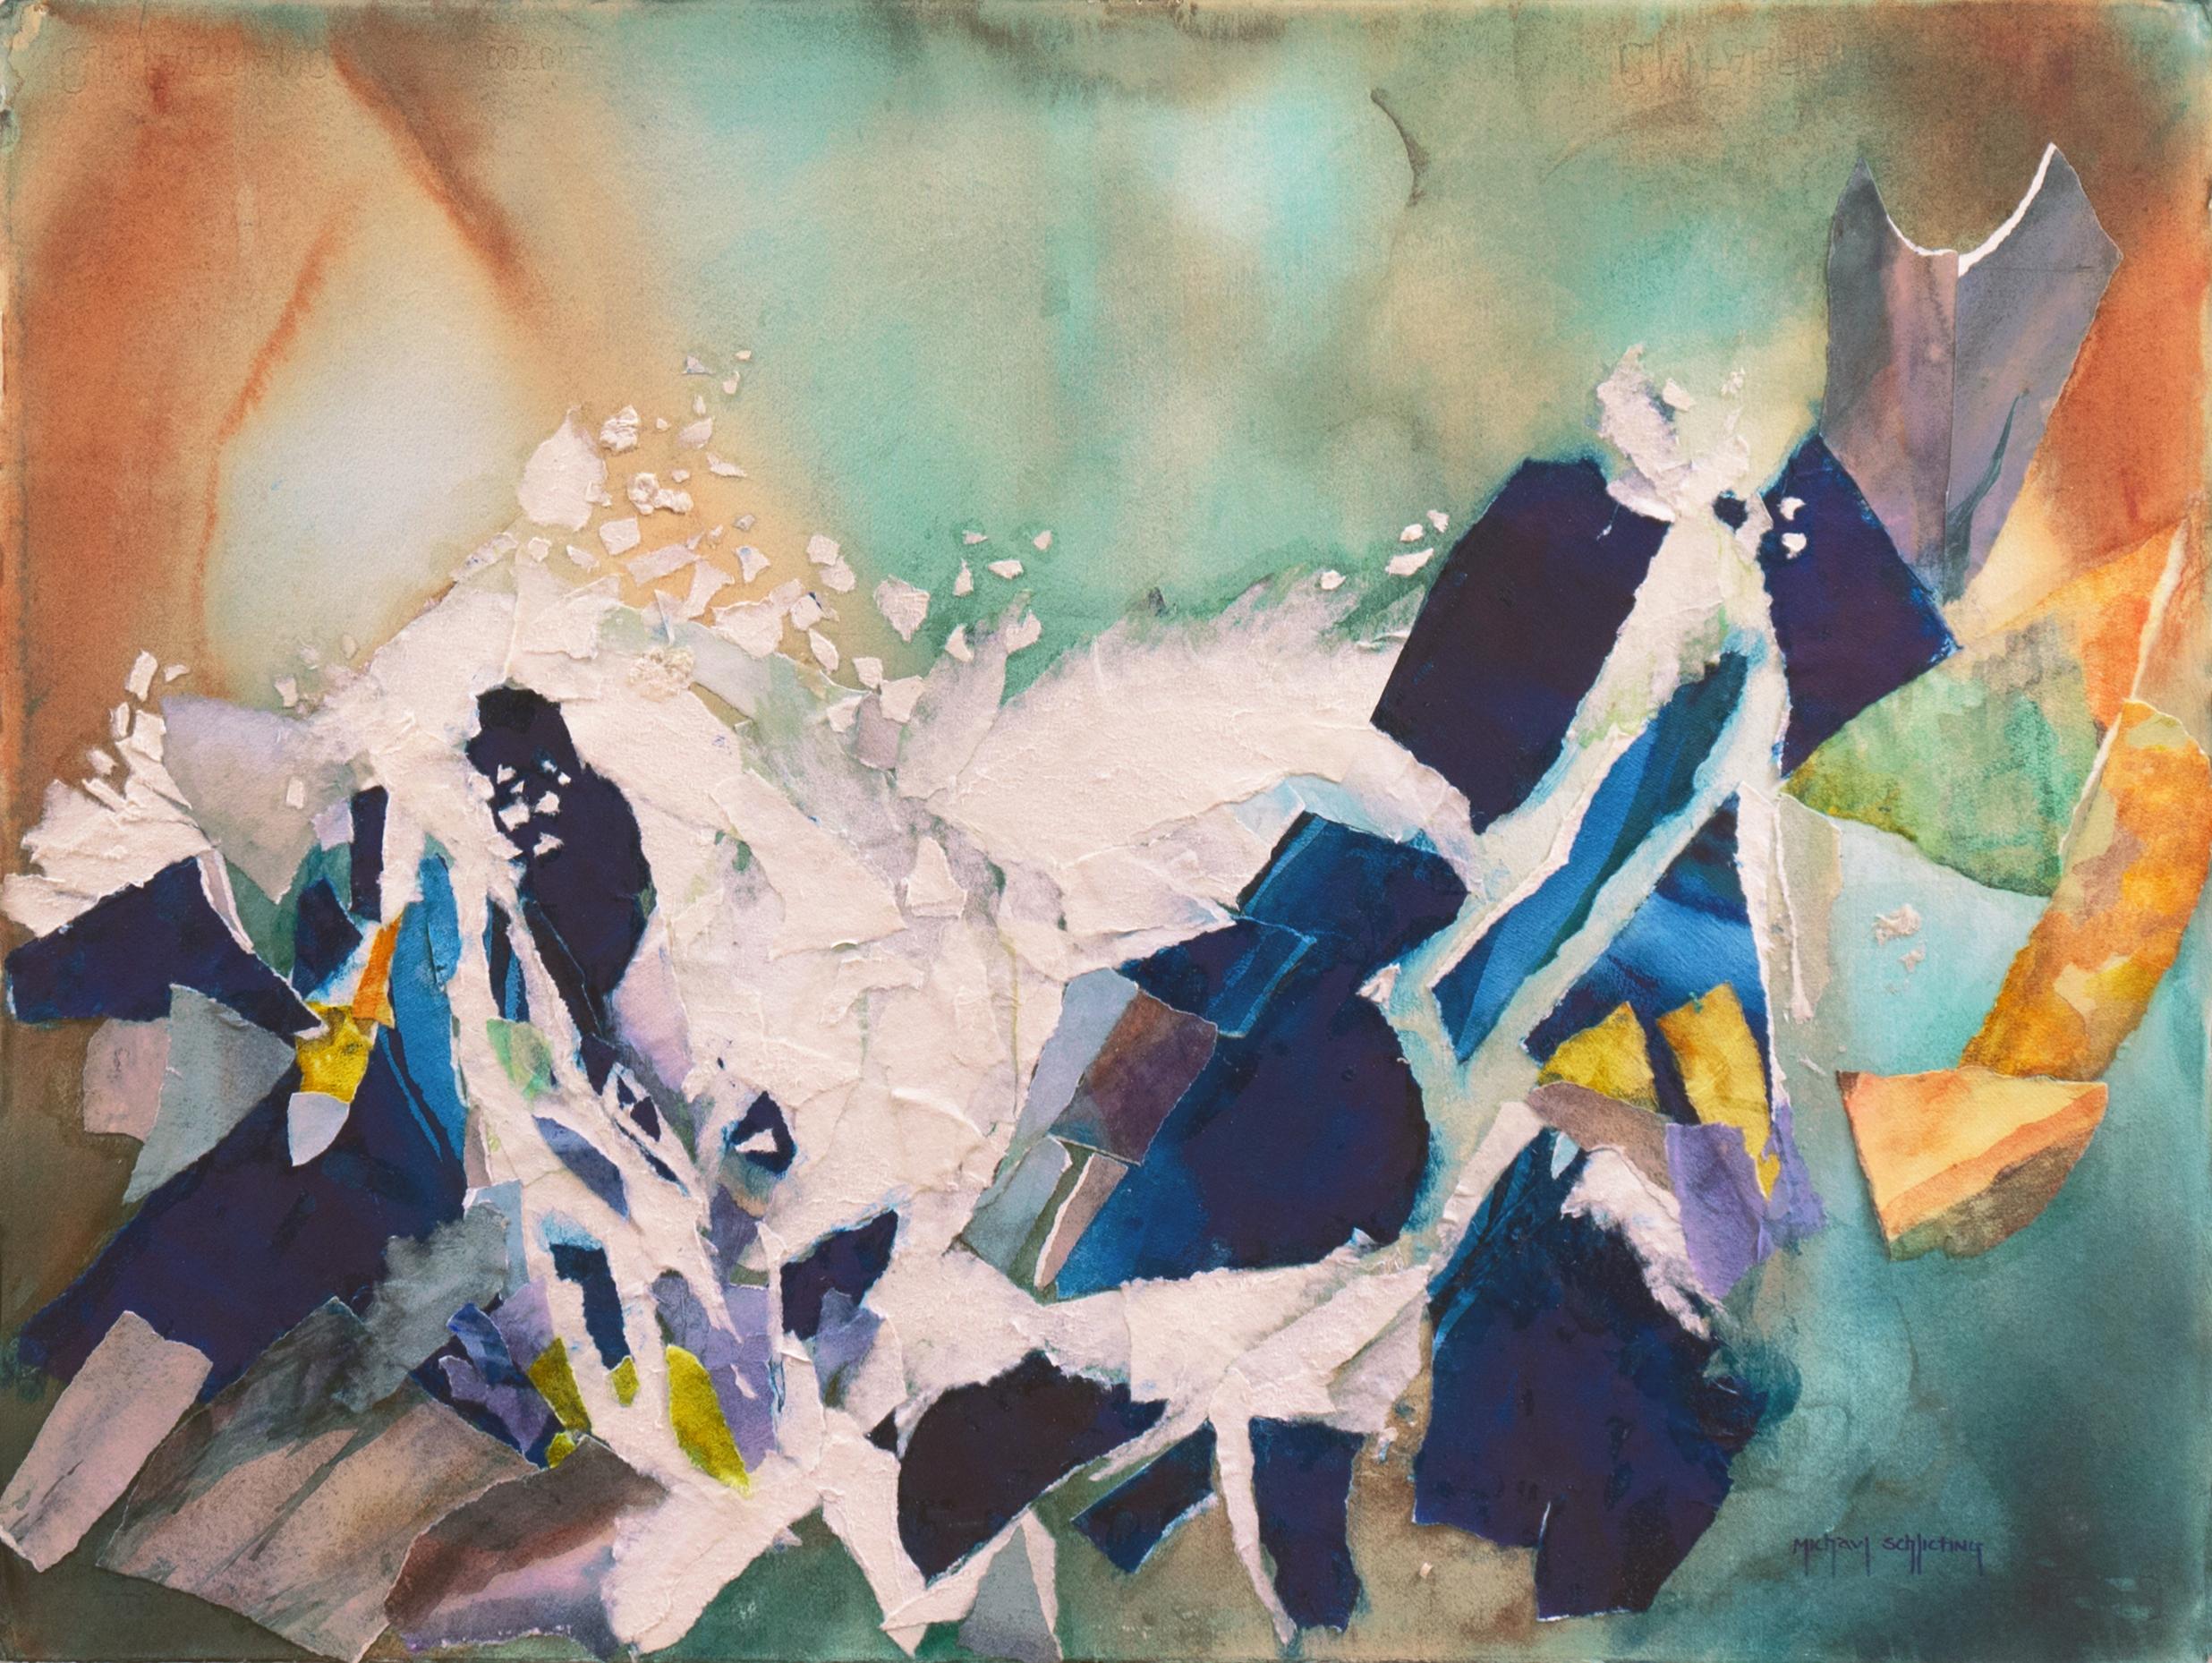 Michael Schlicting Landscape Art - 'Breaking Waves', National Watercolor Society, American Watercolor Society